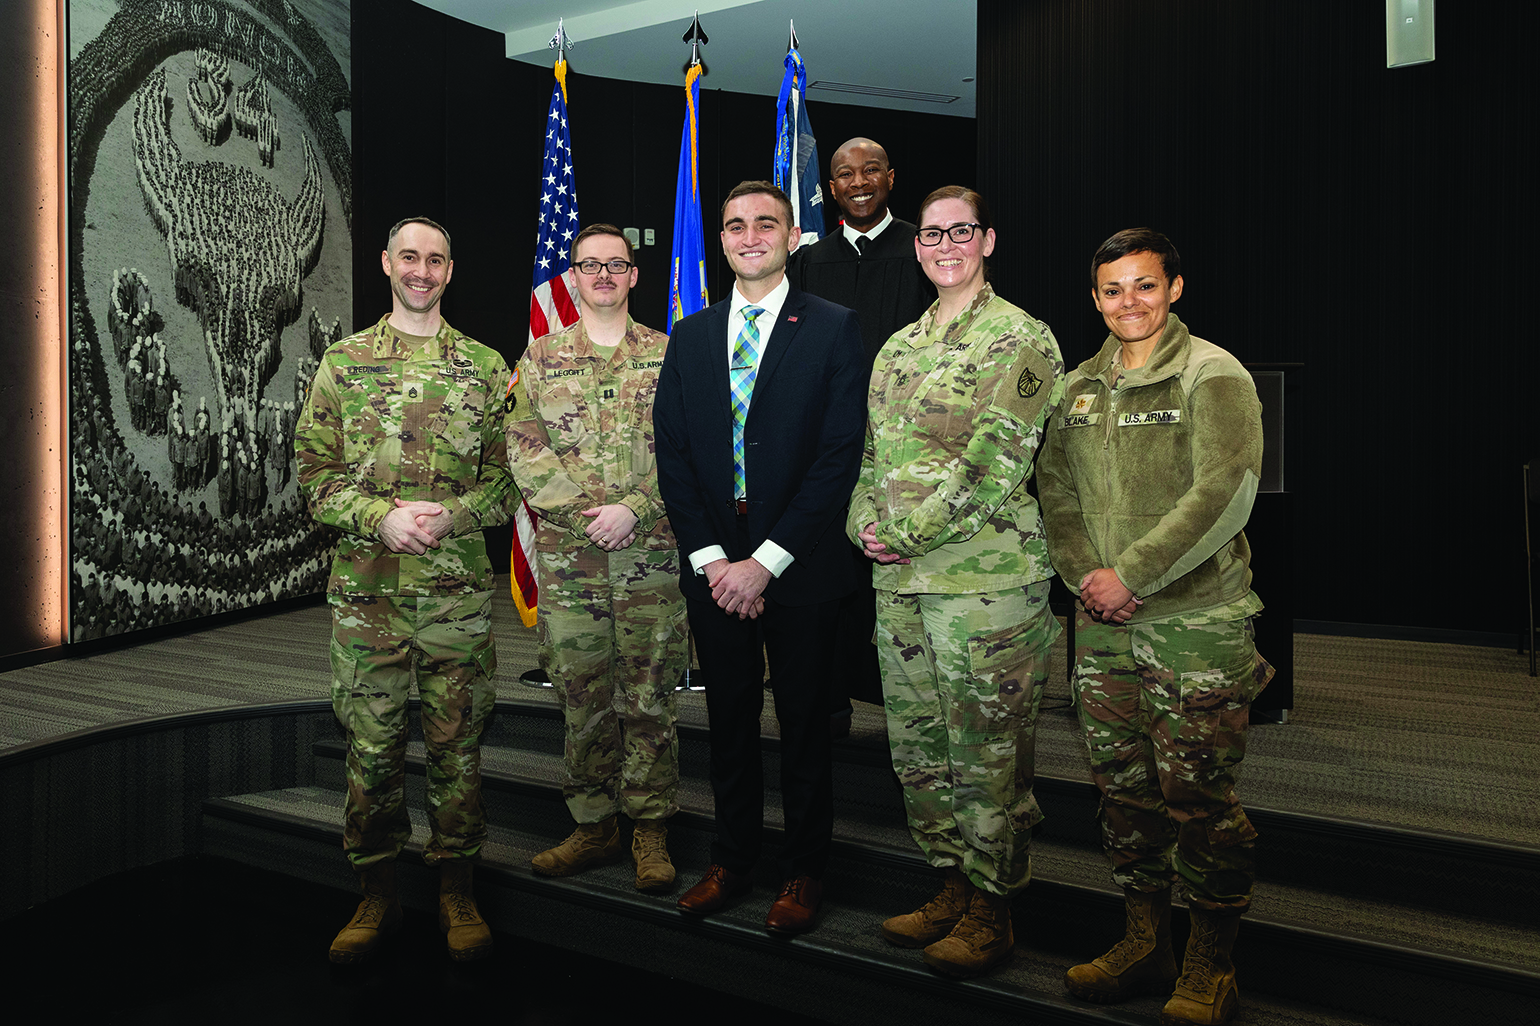 SGT Dylan Moser (center), a paralegal spe
            -
            cialist with Headquarters Support Company,
            34th Red Bull Infantry Division, Minnesota
            National Guard, stands with members of the
            Minnesota National Guard’s legal team at the
            General John W. Vessey Readiness Center
            on 13 November 2023. SGT Moser recently
            graduated law school and passed the bar
            exam. (Credit: SSG Mahsima Alkamooneh)